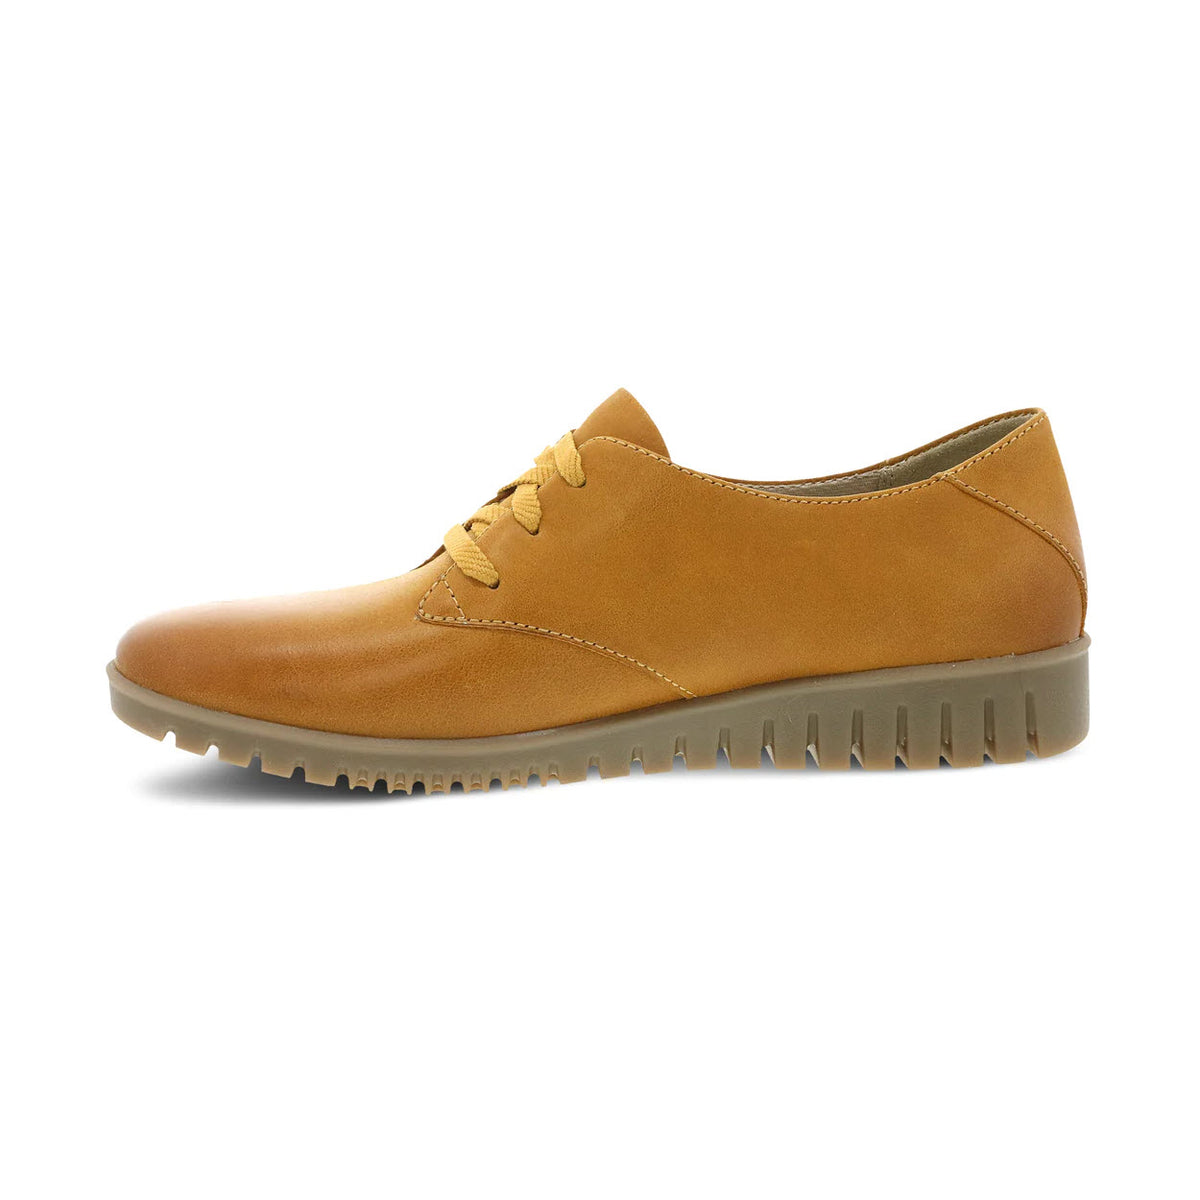 A single Dansko Libbie Mustard Burnished Oxford shoe with laces and a thick, ridged sole, displayed on a white background.